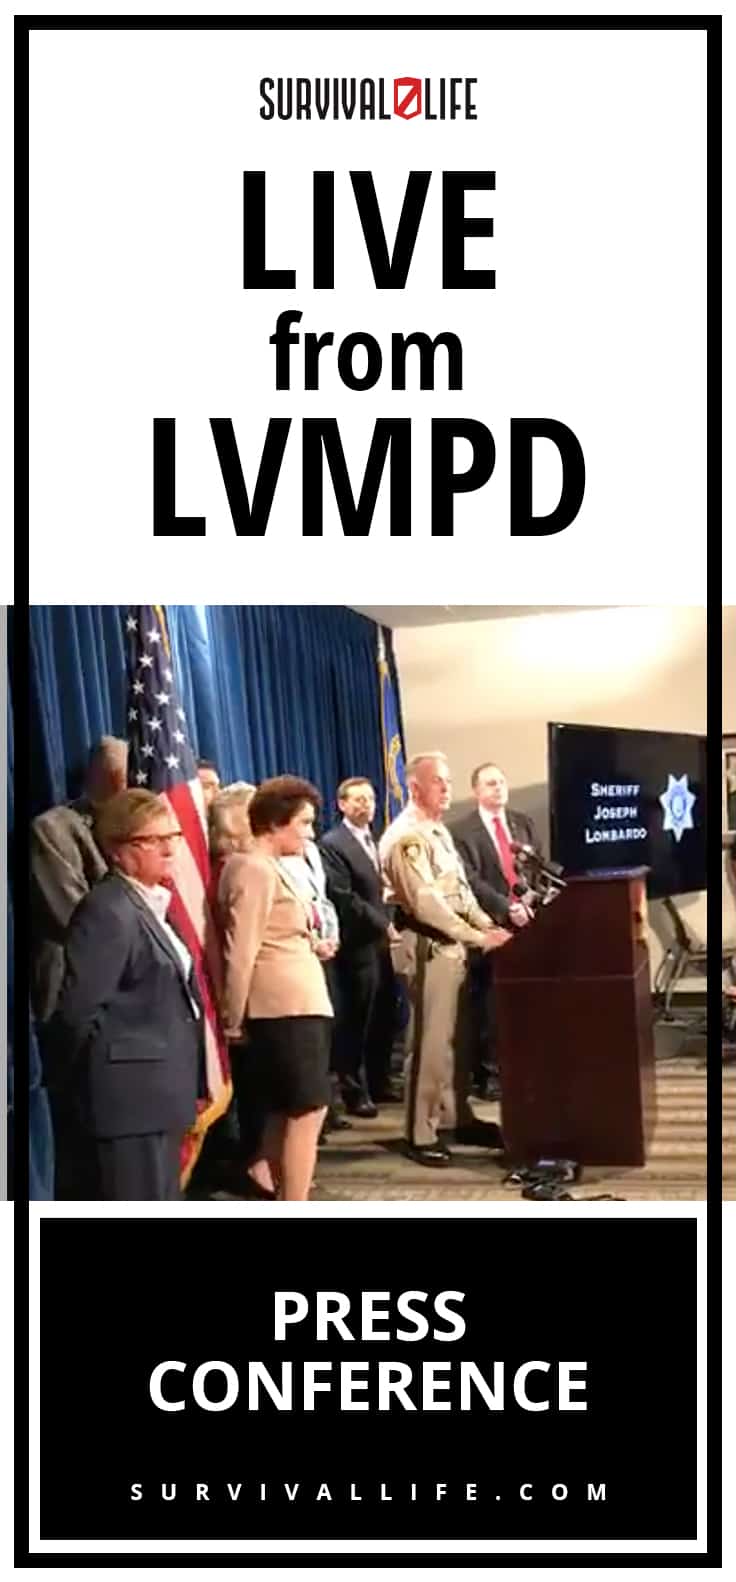 LIVE from LVMPD press conference: